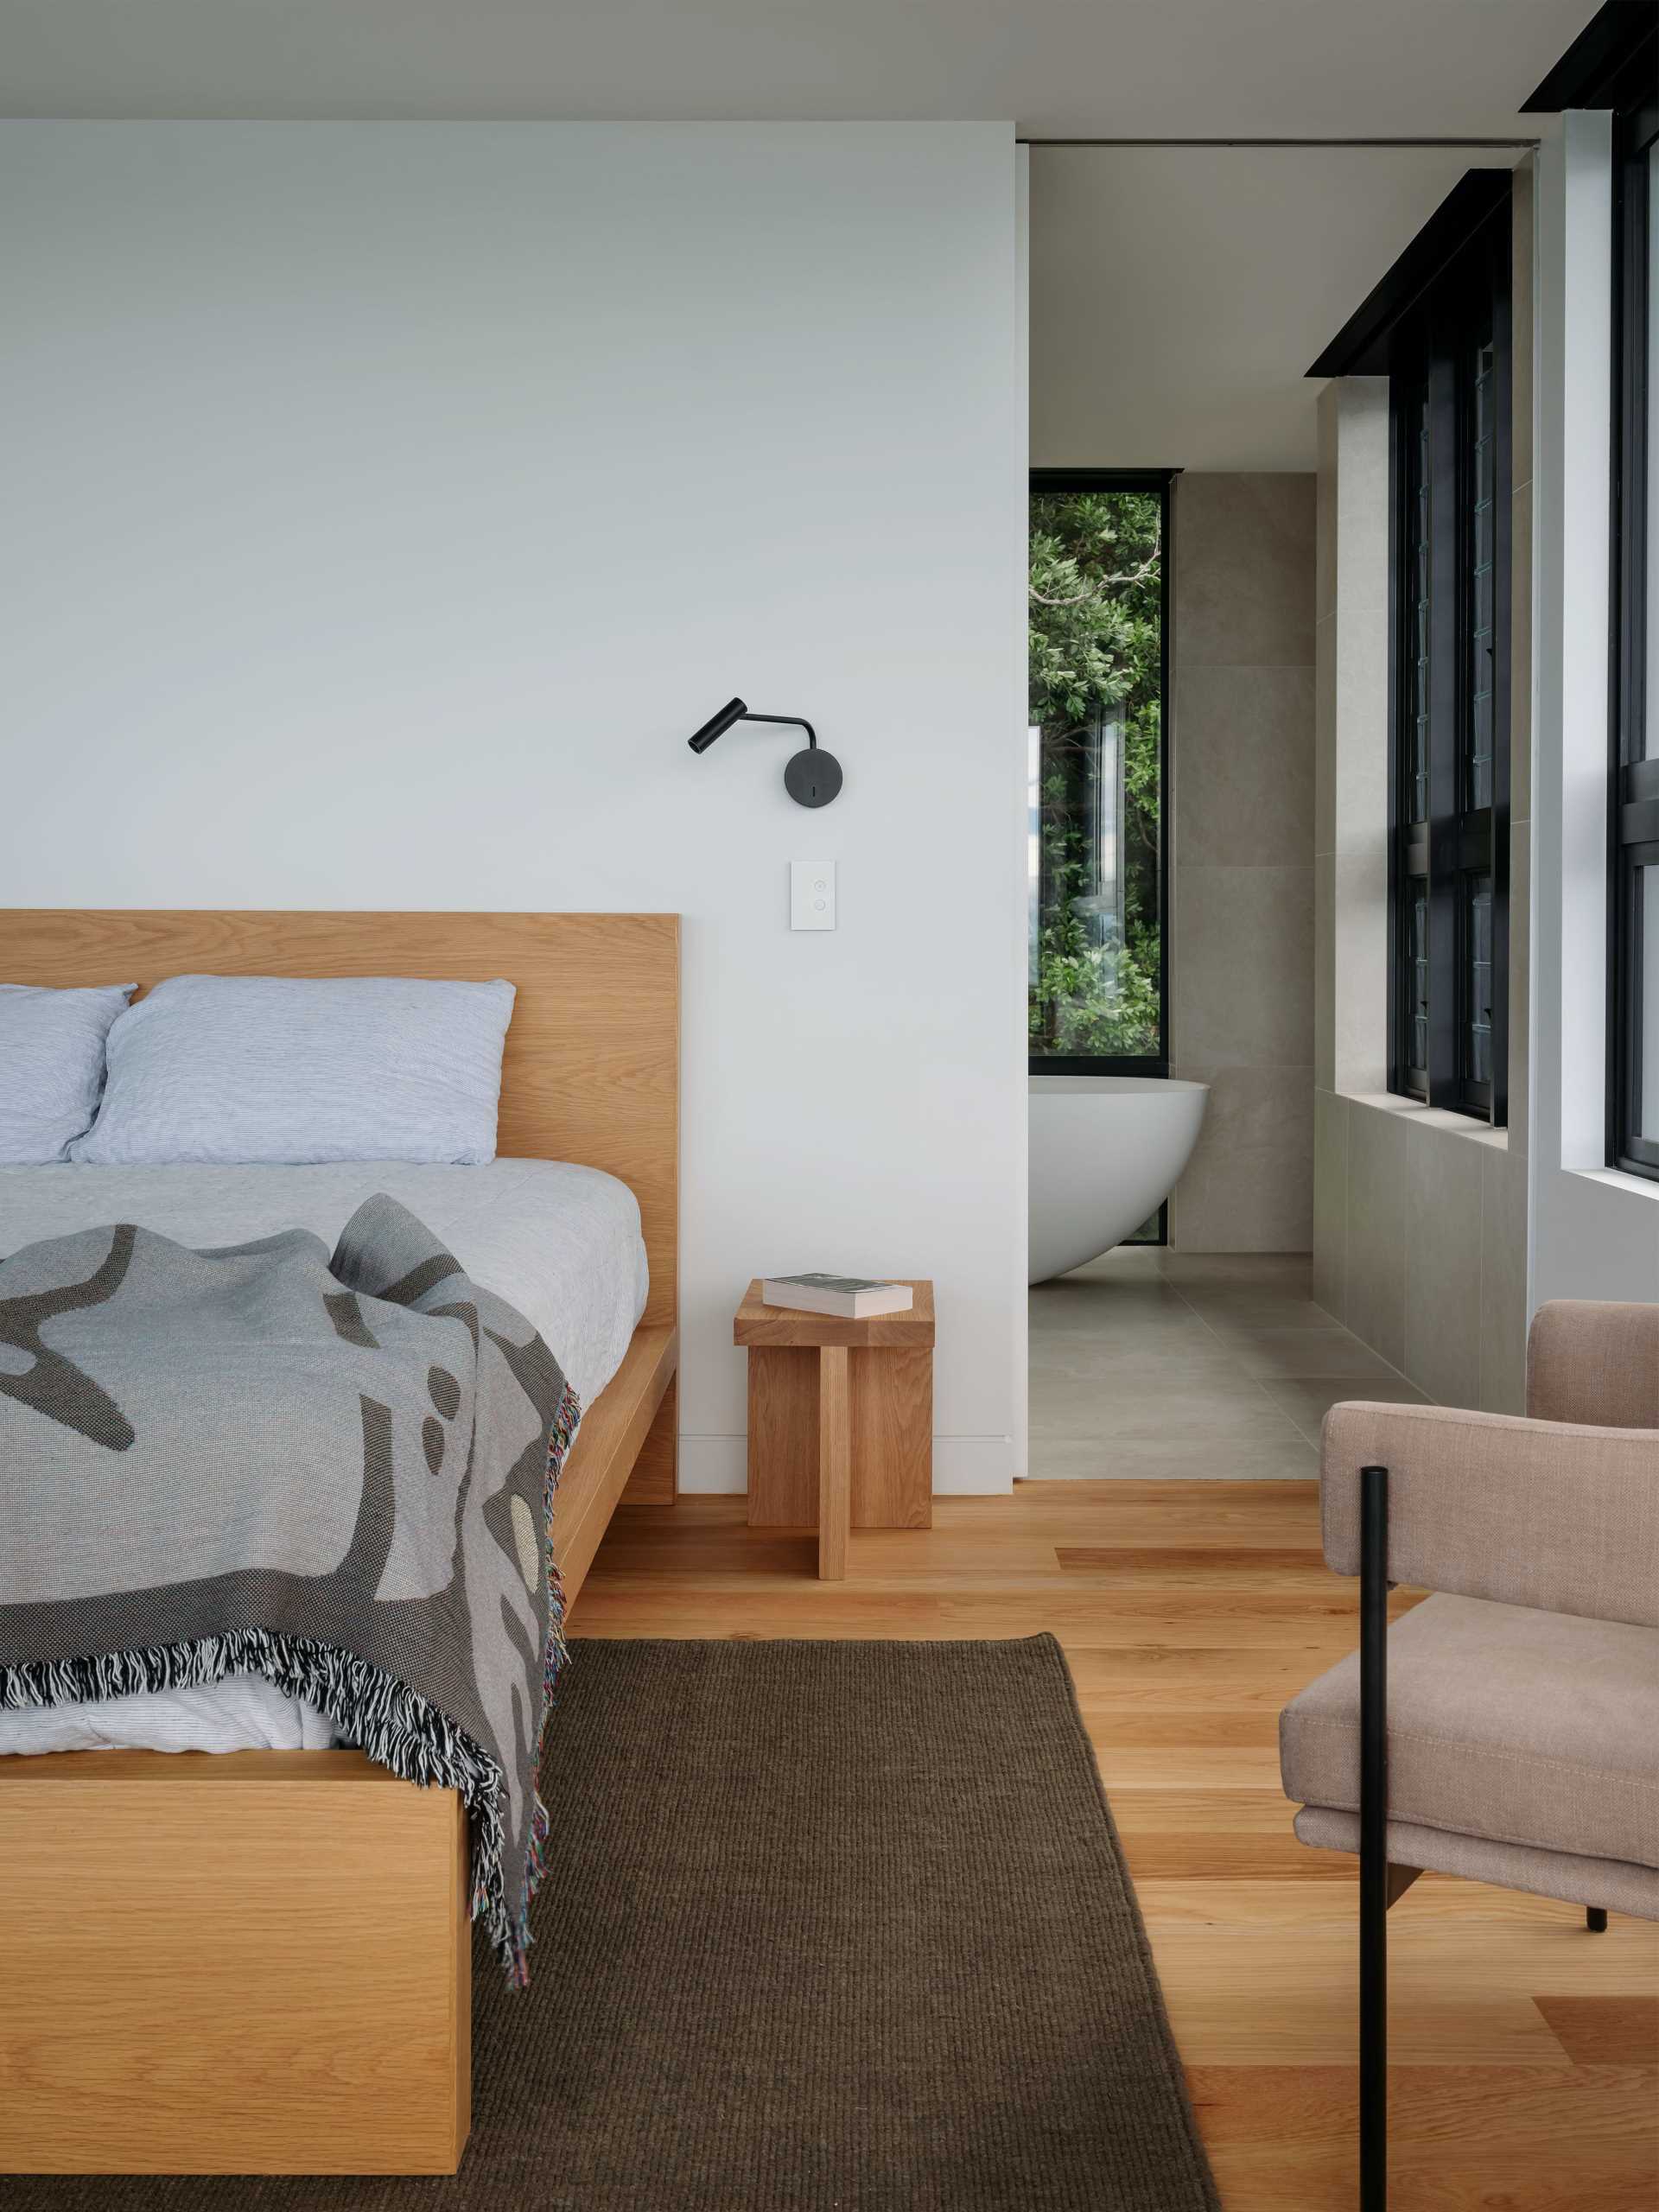 In this modern bedroom, the wood floor and wood bed frame add a sense of warmth to the space, while a tall window frames the view.